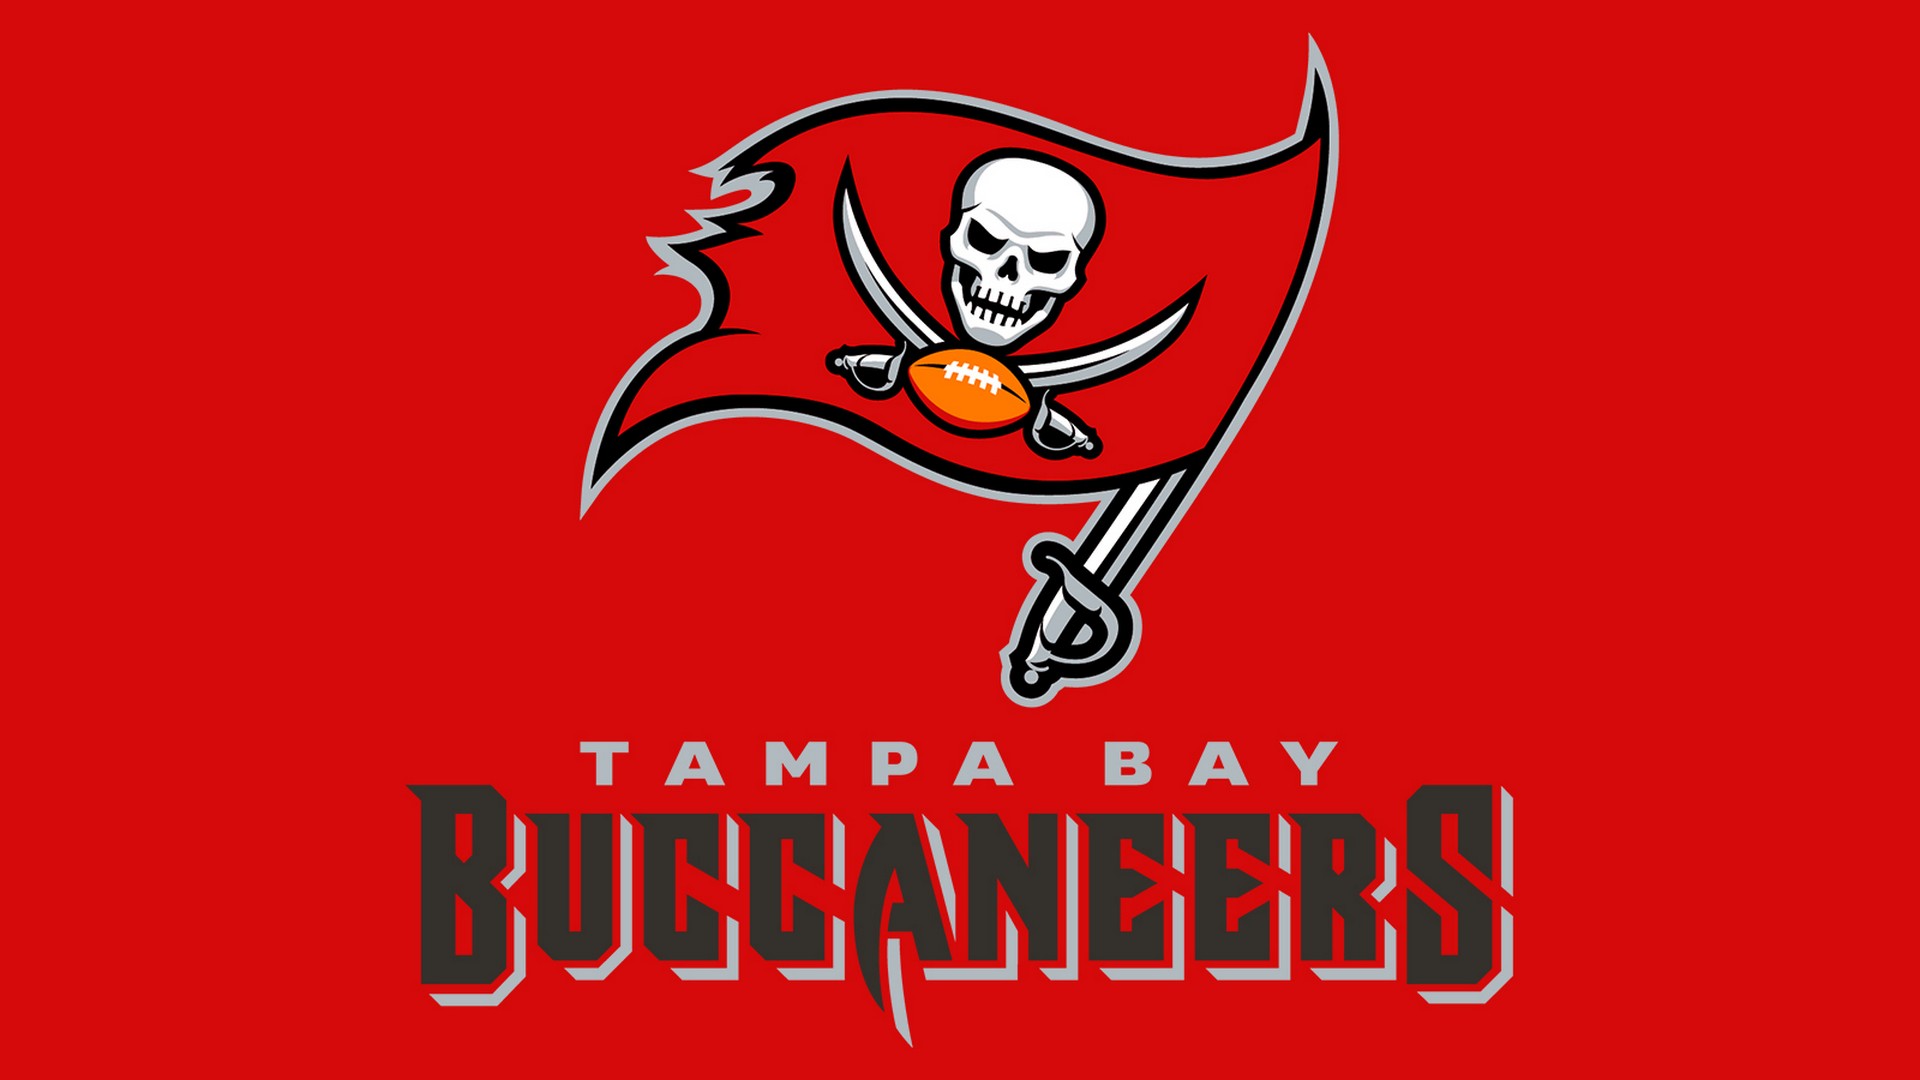 Wallpapers HD Tampa Bay Buccaneers With high-resolution 1920X1080 pixel. You can use this wallpaper for your Mac or Windows Desktop Background, iPhone, Android or Tablet and another Smartphone device